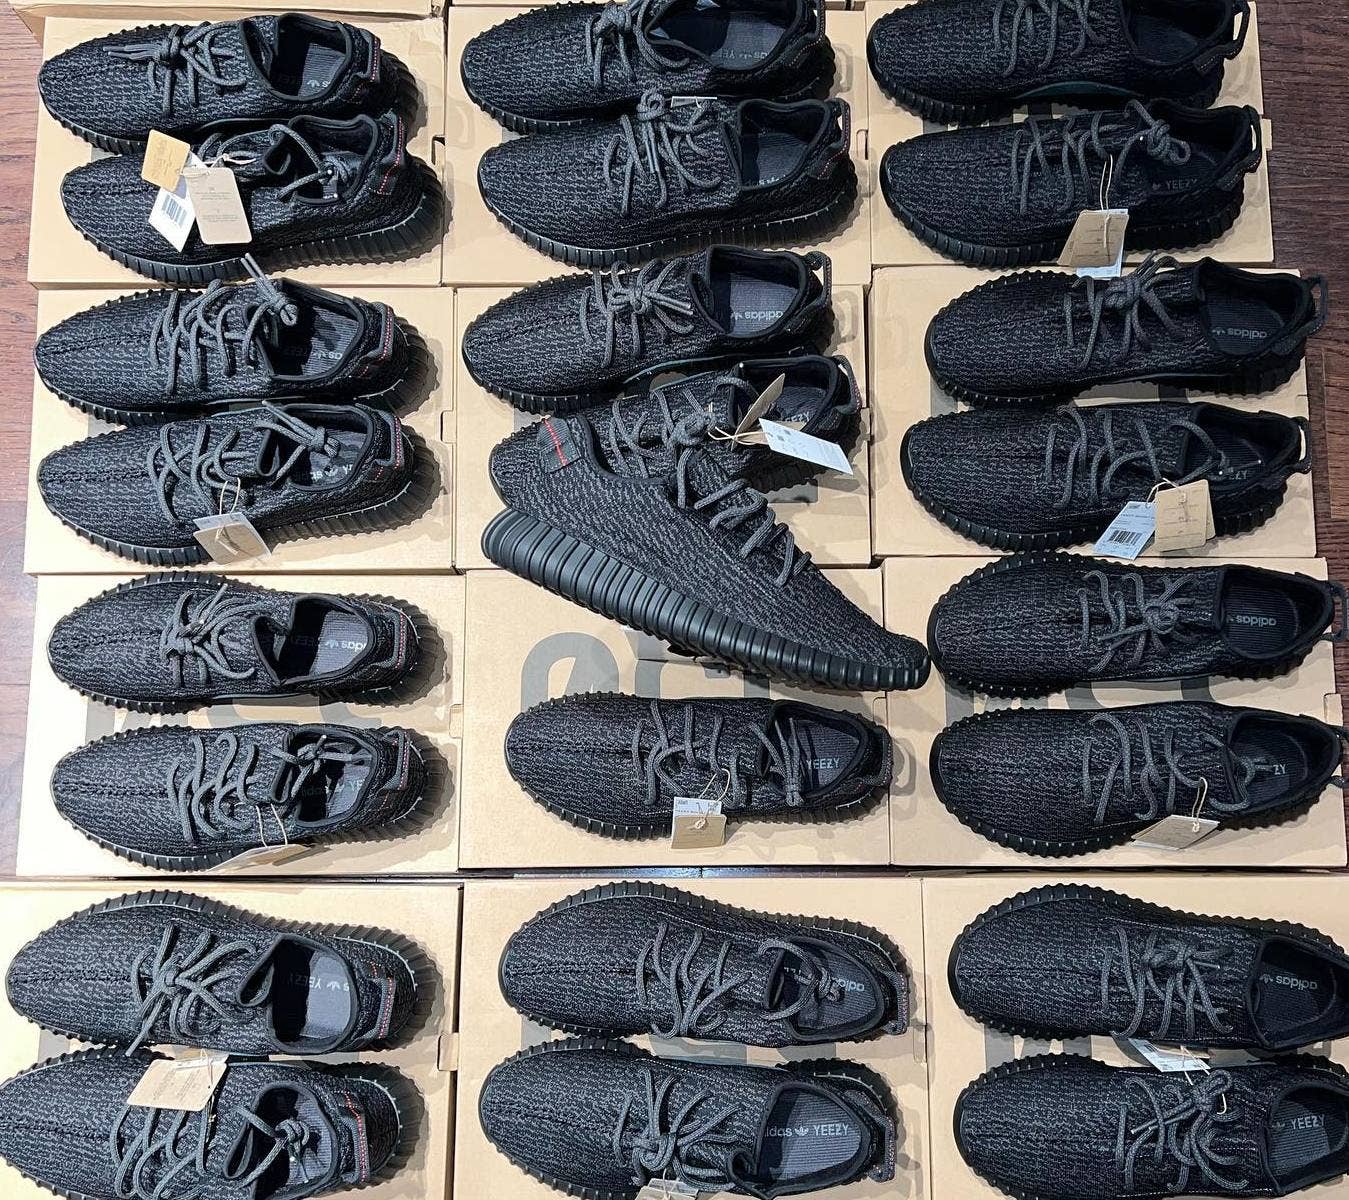 Yeezy sneakers in hot demand on resale platforms even after Kanye